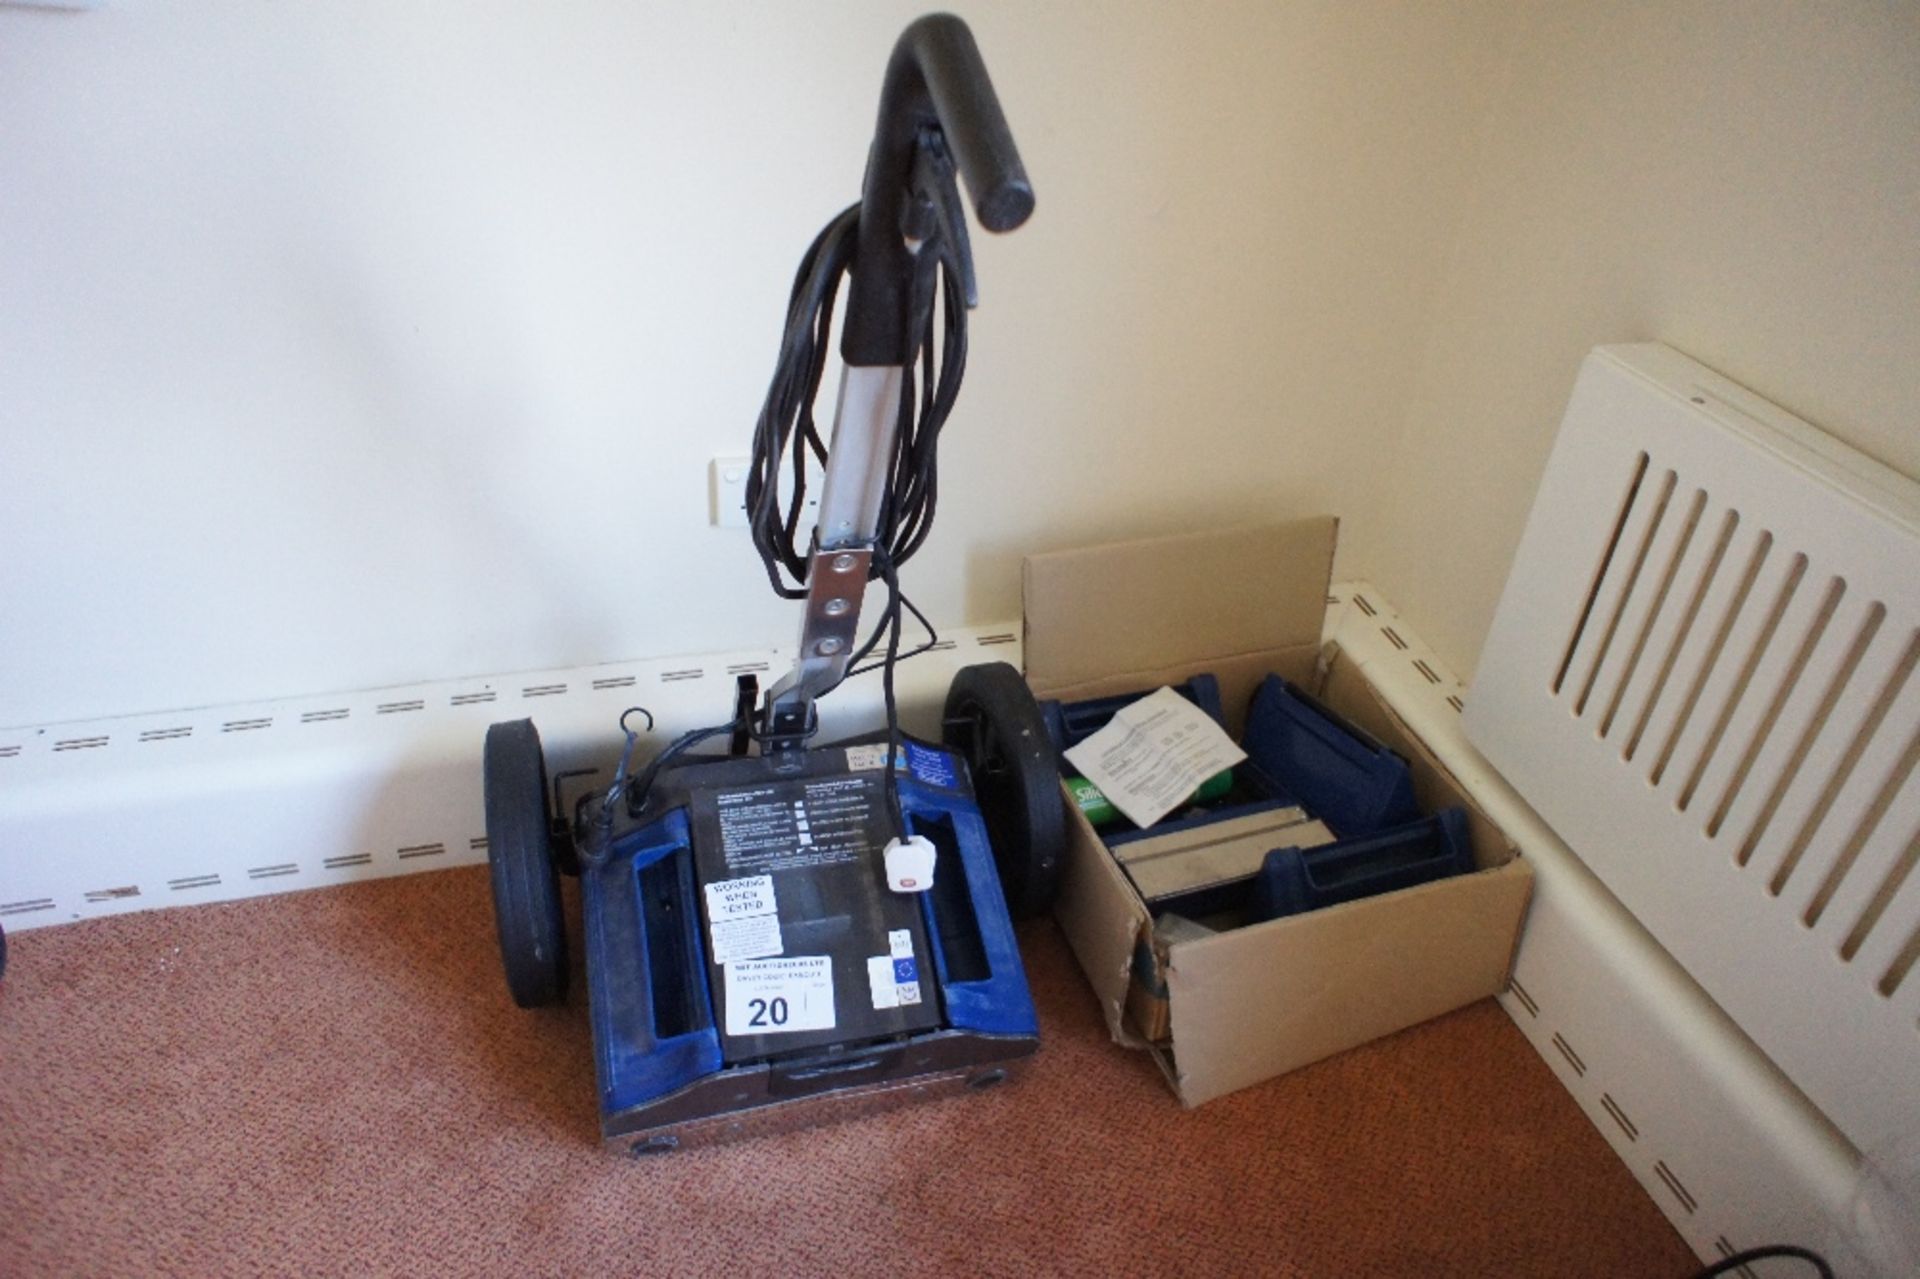 1 DUPLEX carpet cleaning machine (no model visible) (located in room 7, Davey Court)